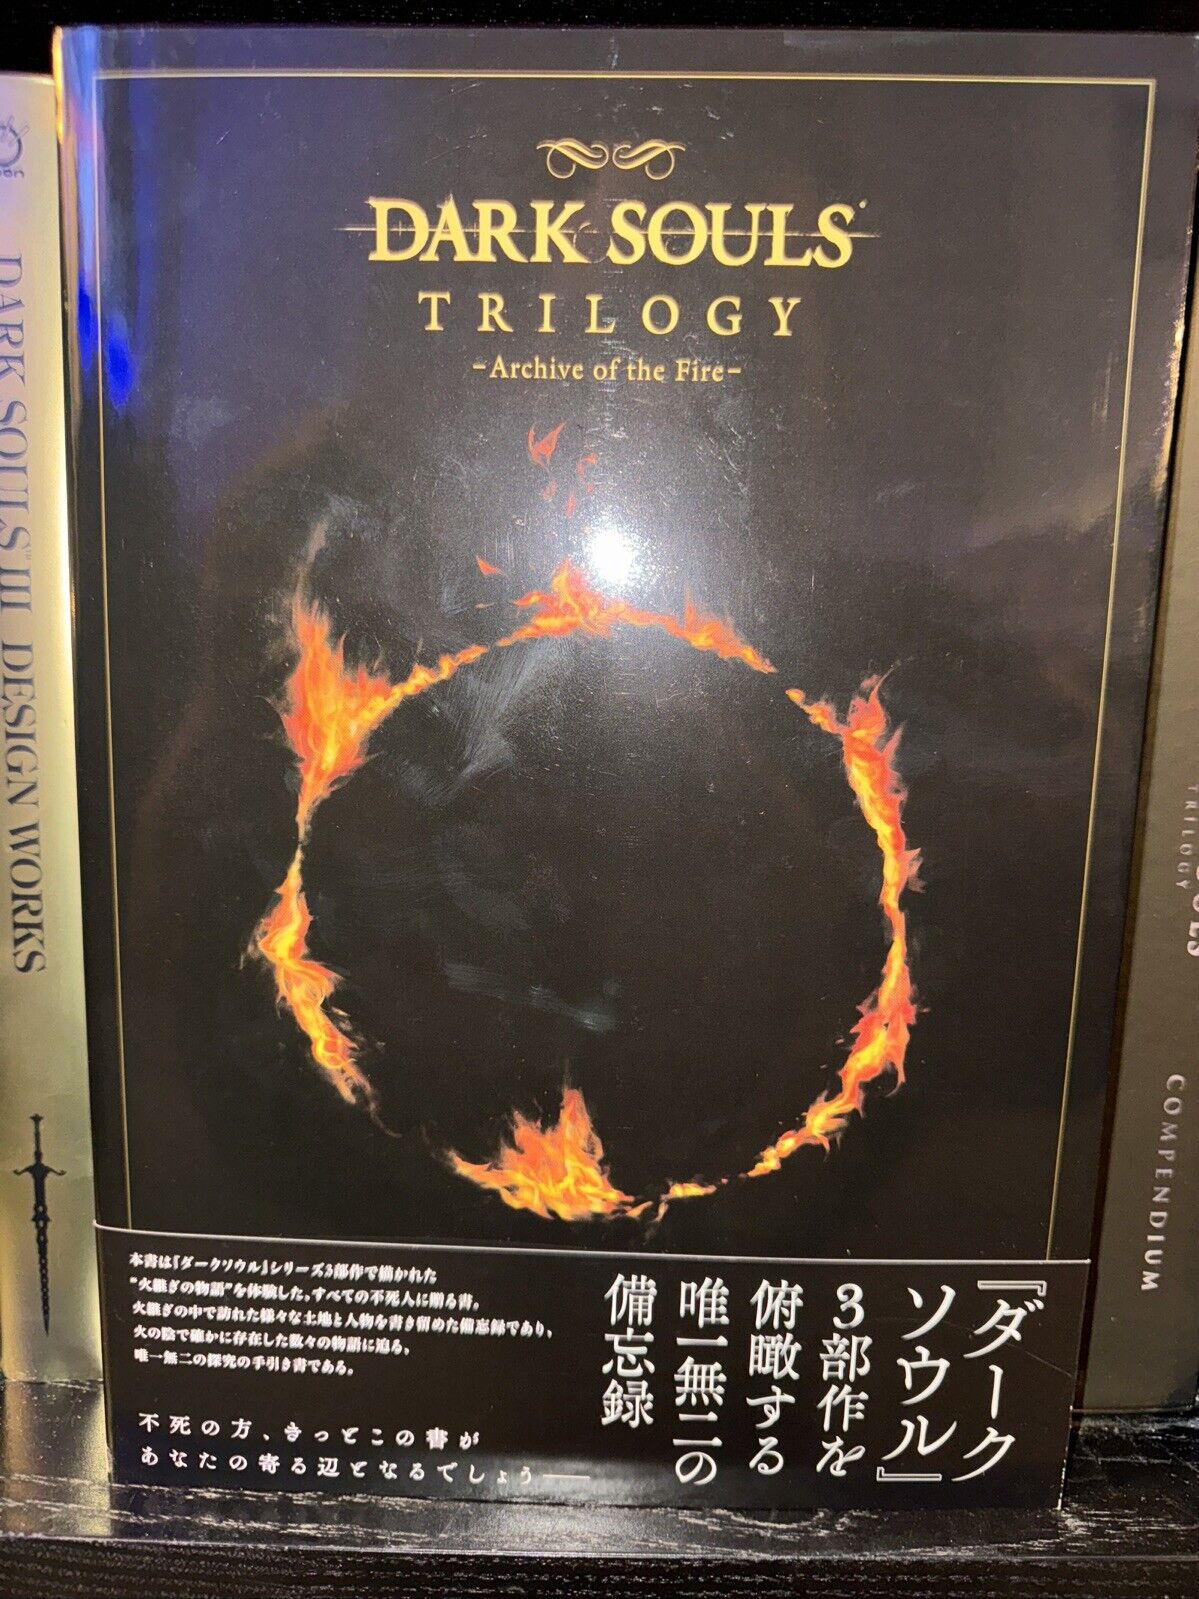 Dark Souls Trilogy Archive of the Fire Art Book ｗritten in japanese language